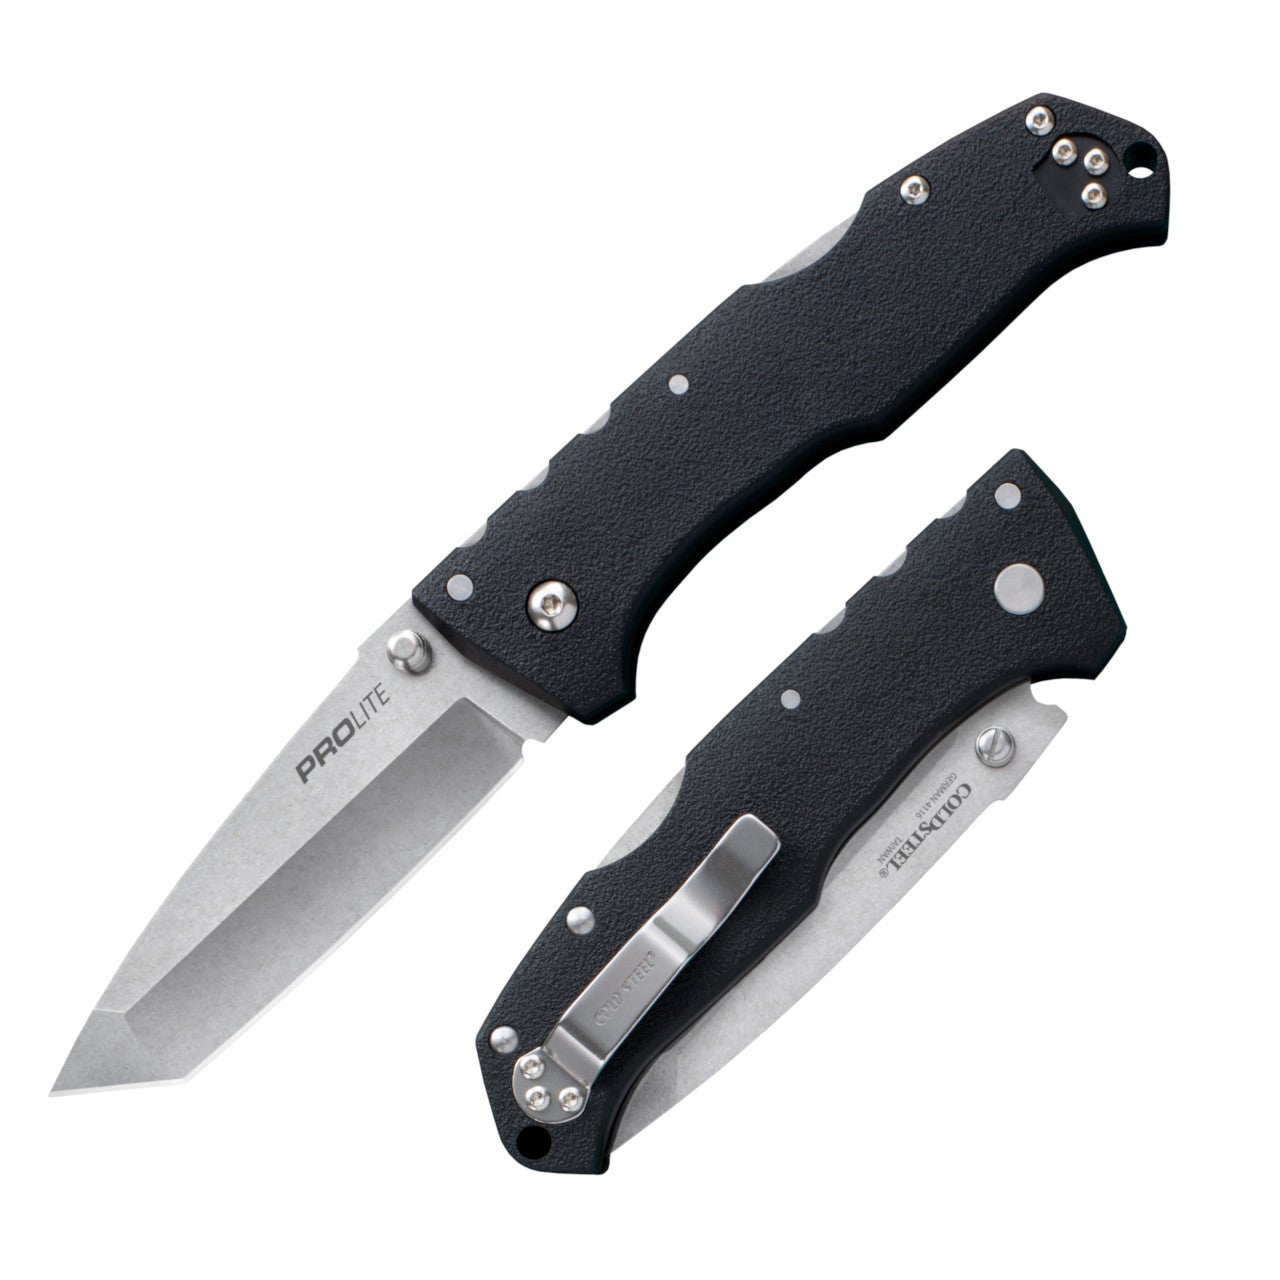 Cold Steel Announces NEW Folders In Pro Lite Series